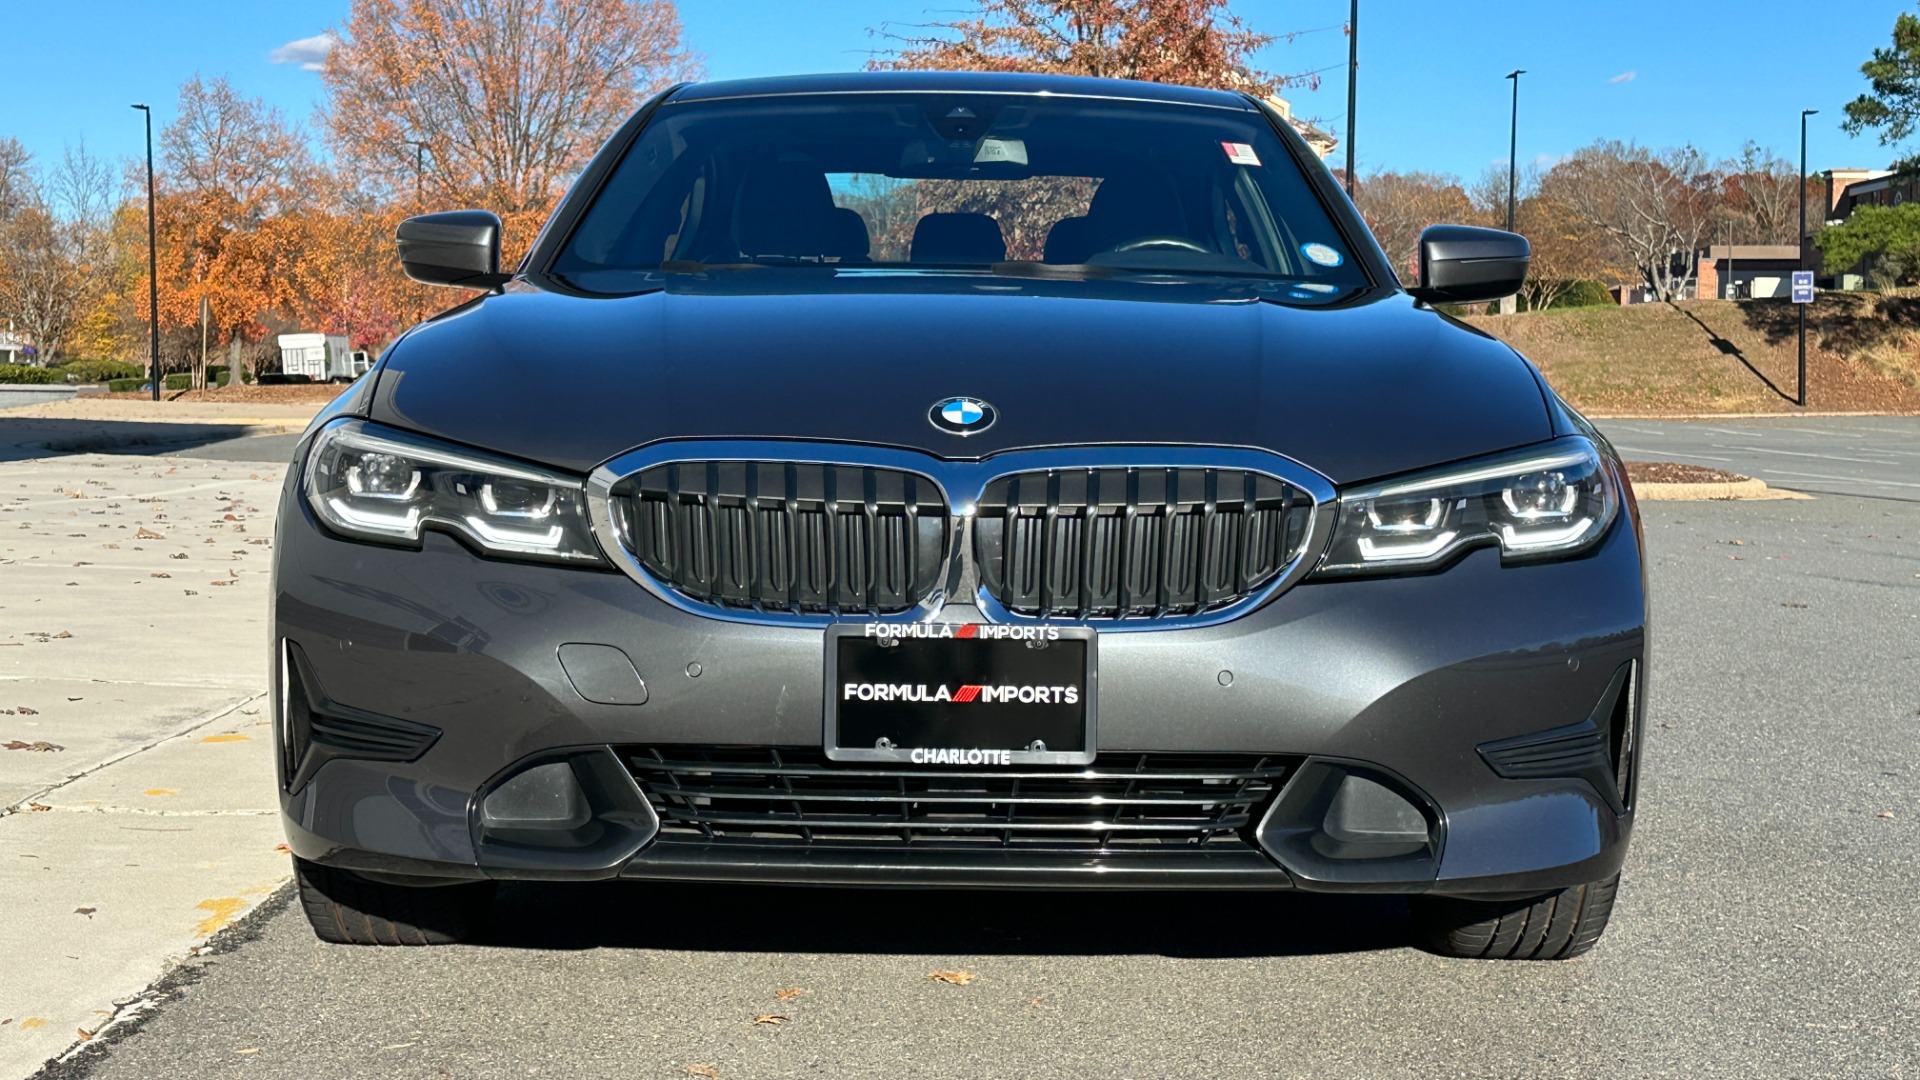 Used 2020 BMW 3 Series 330i xDRIVE / CONVENIENCE / HEATED SEATS / AMBIENT LIGHTING / REMOTE START for sale $35,995 at Formula Imports in Charlotte NC 28227 8